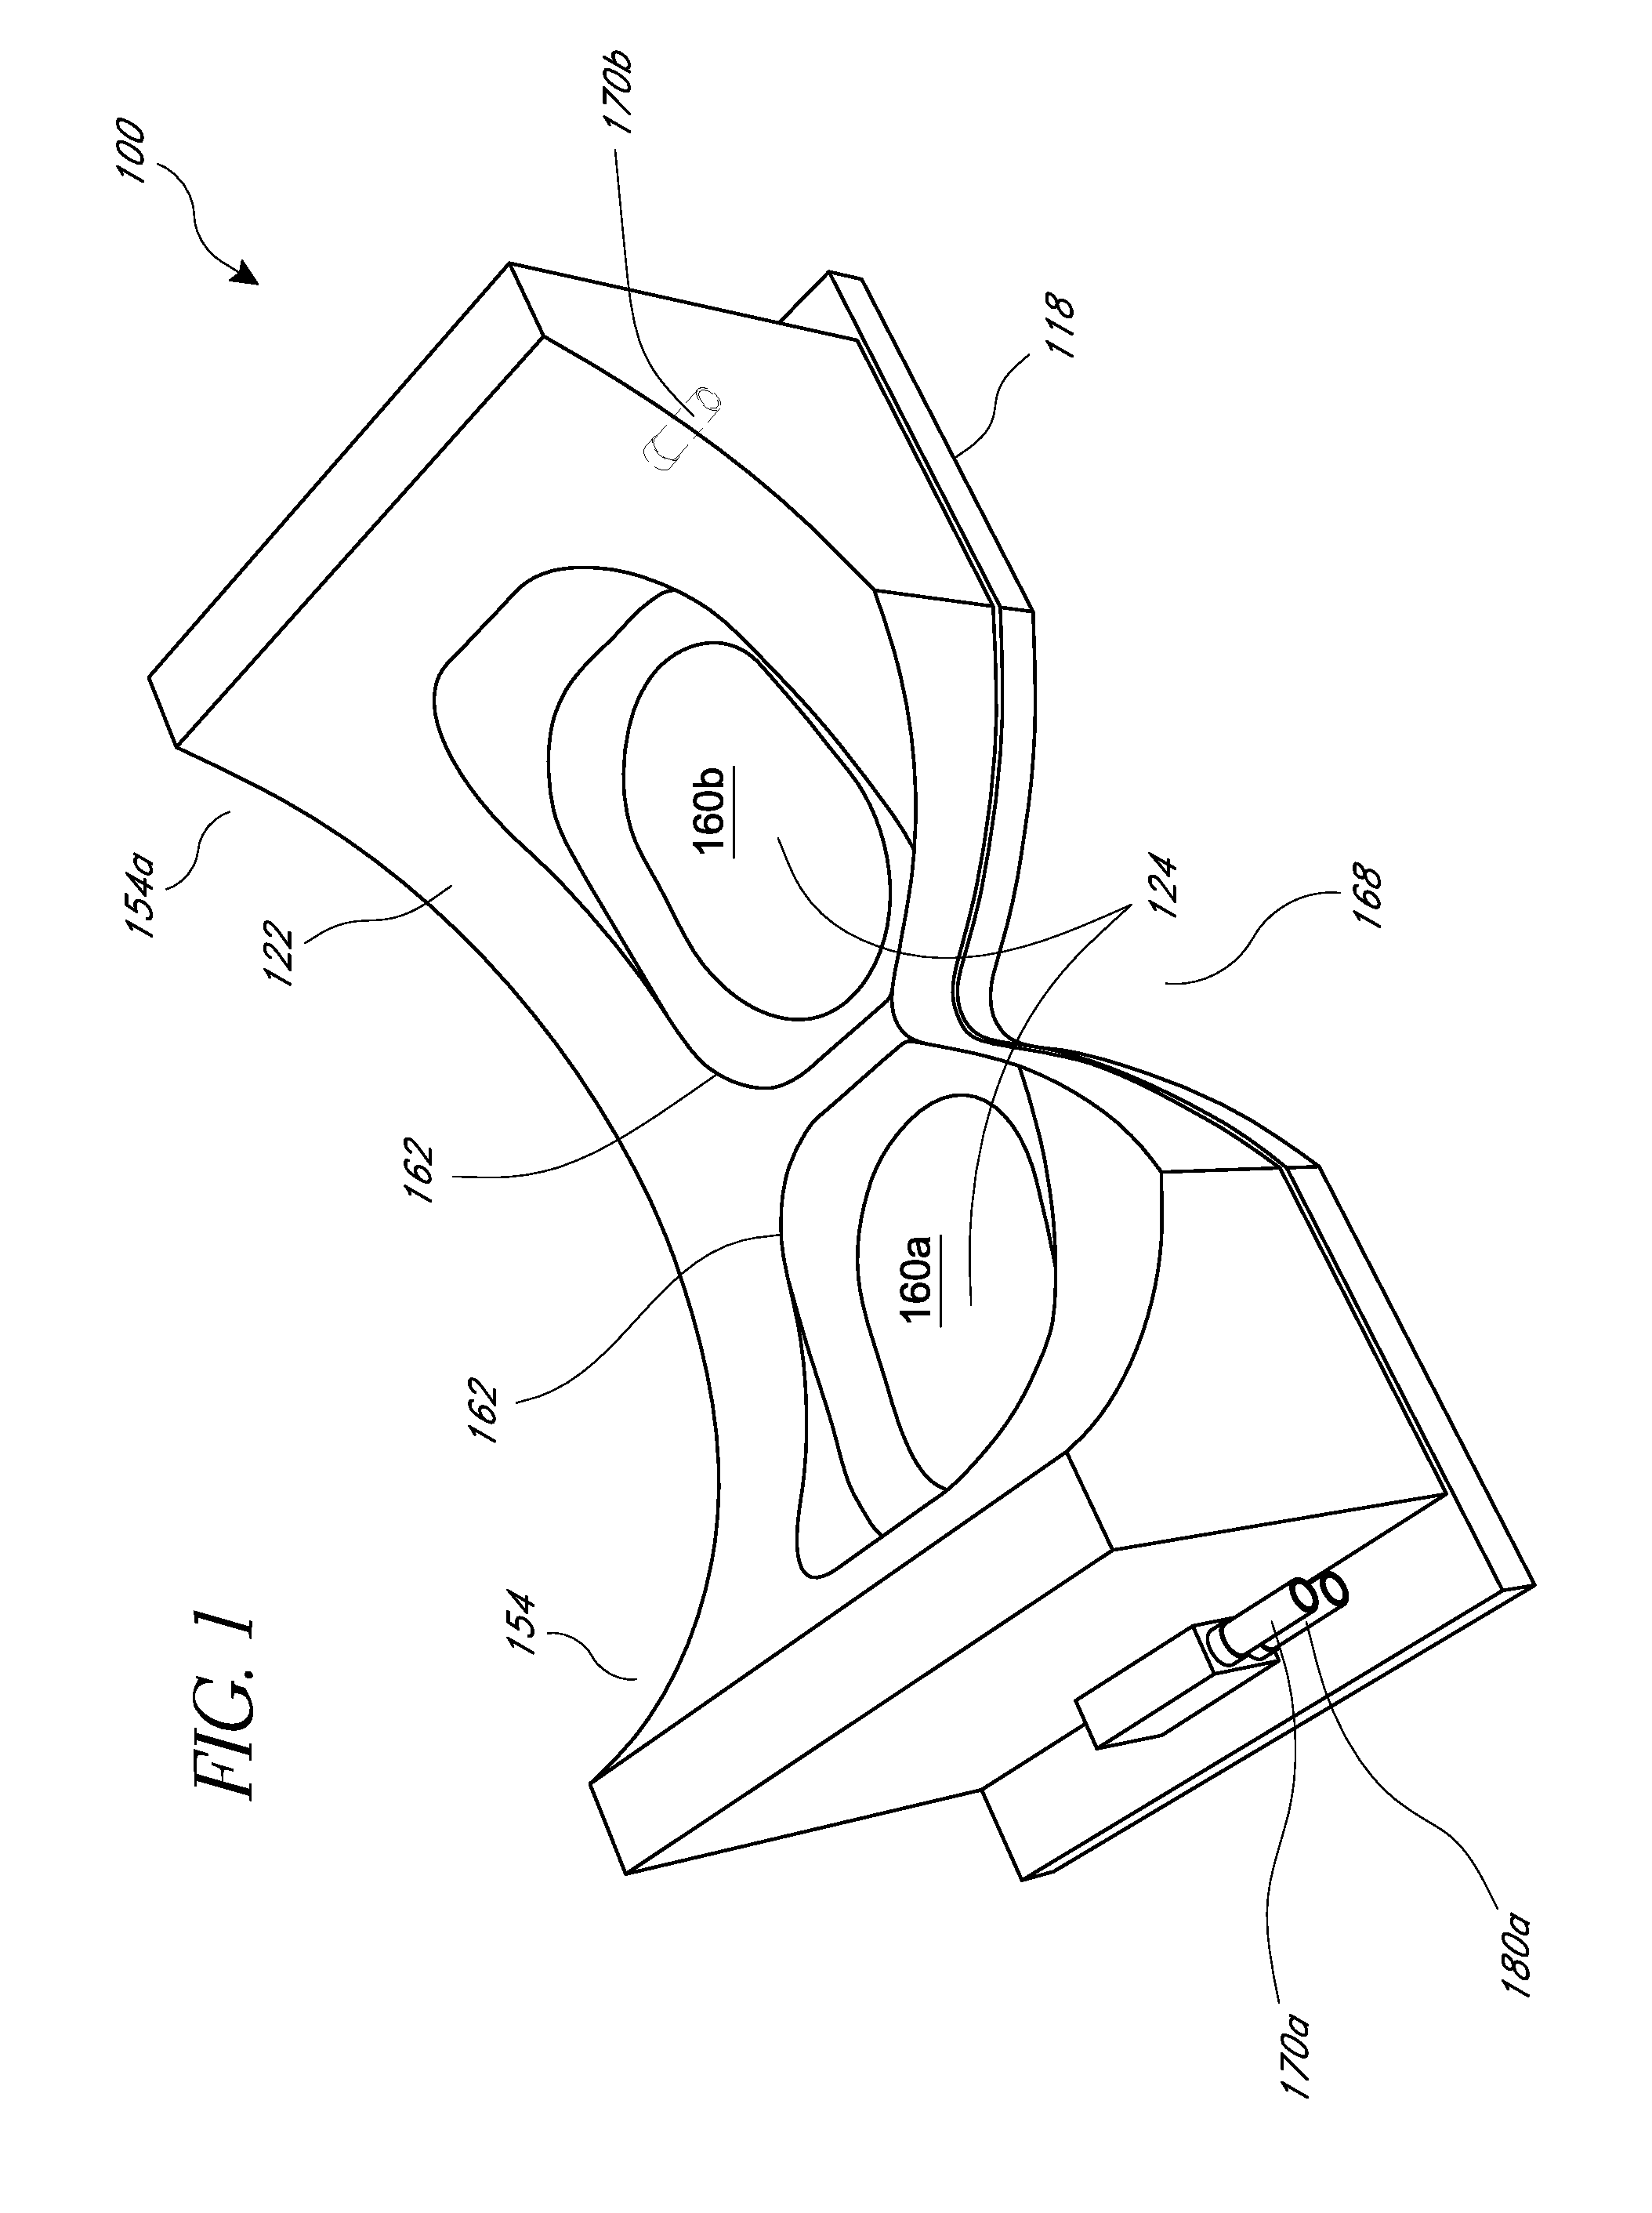 Inflatable medical interfaces and other medcal devices, systems, and methods